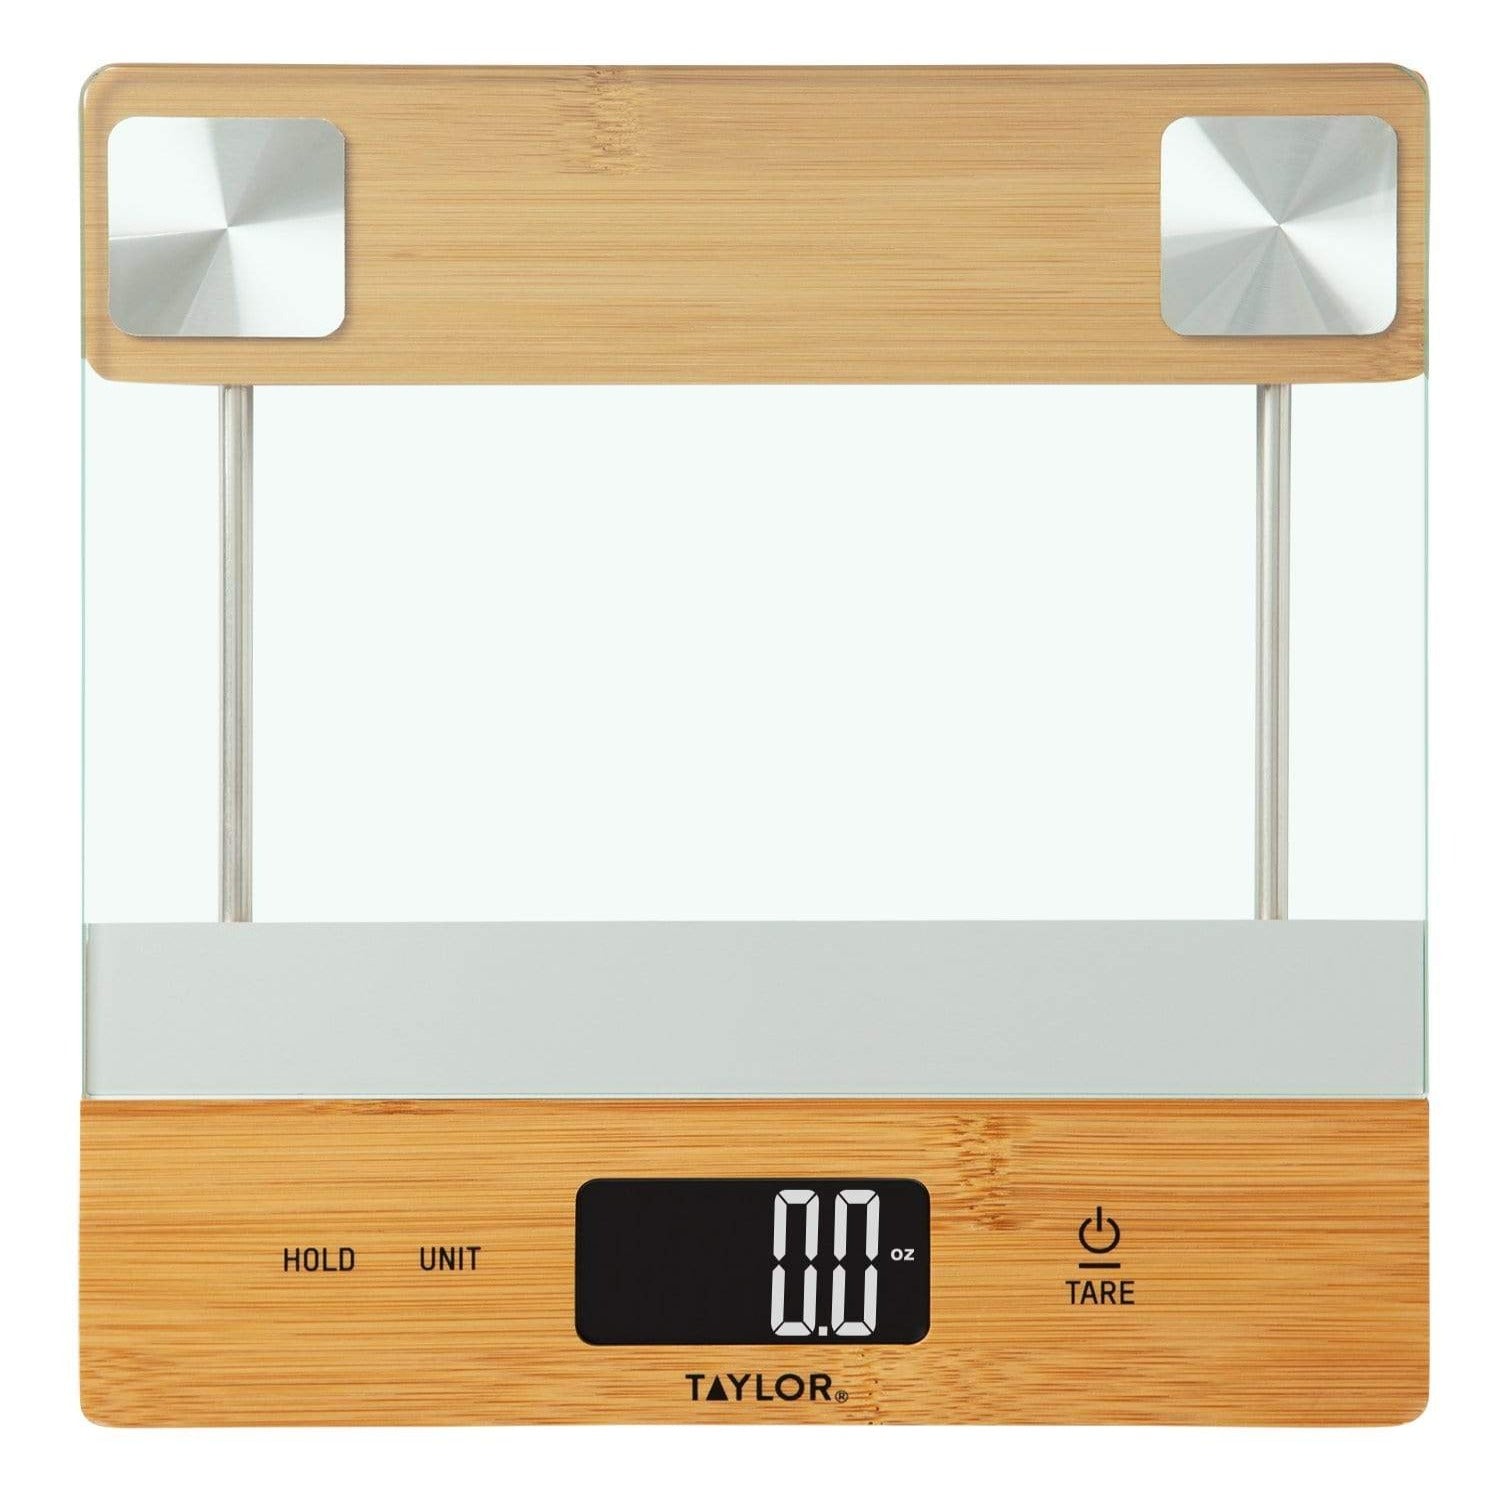  Taylor Glass Top Food Scale with Touch Control Buttons